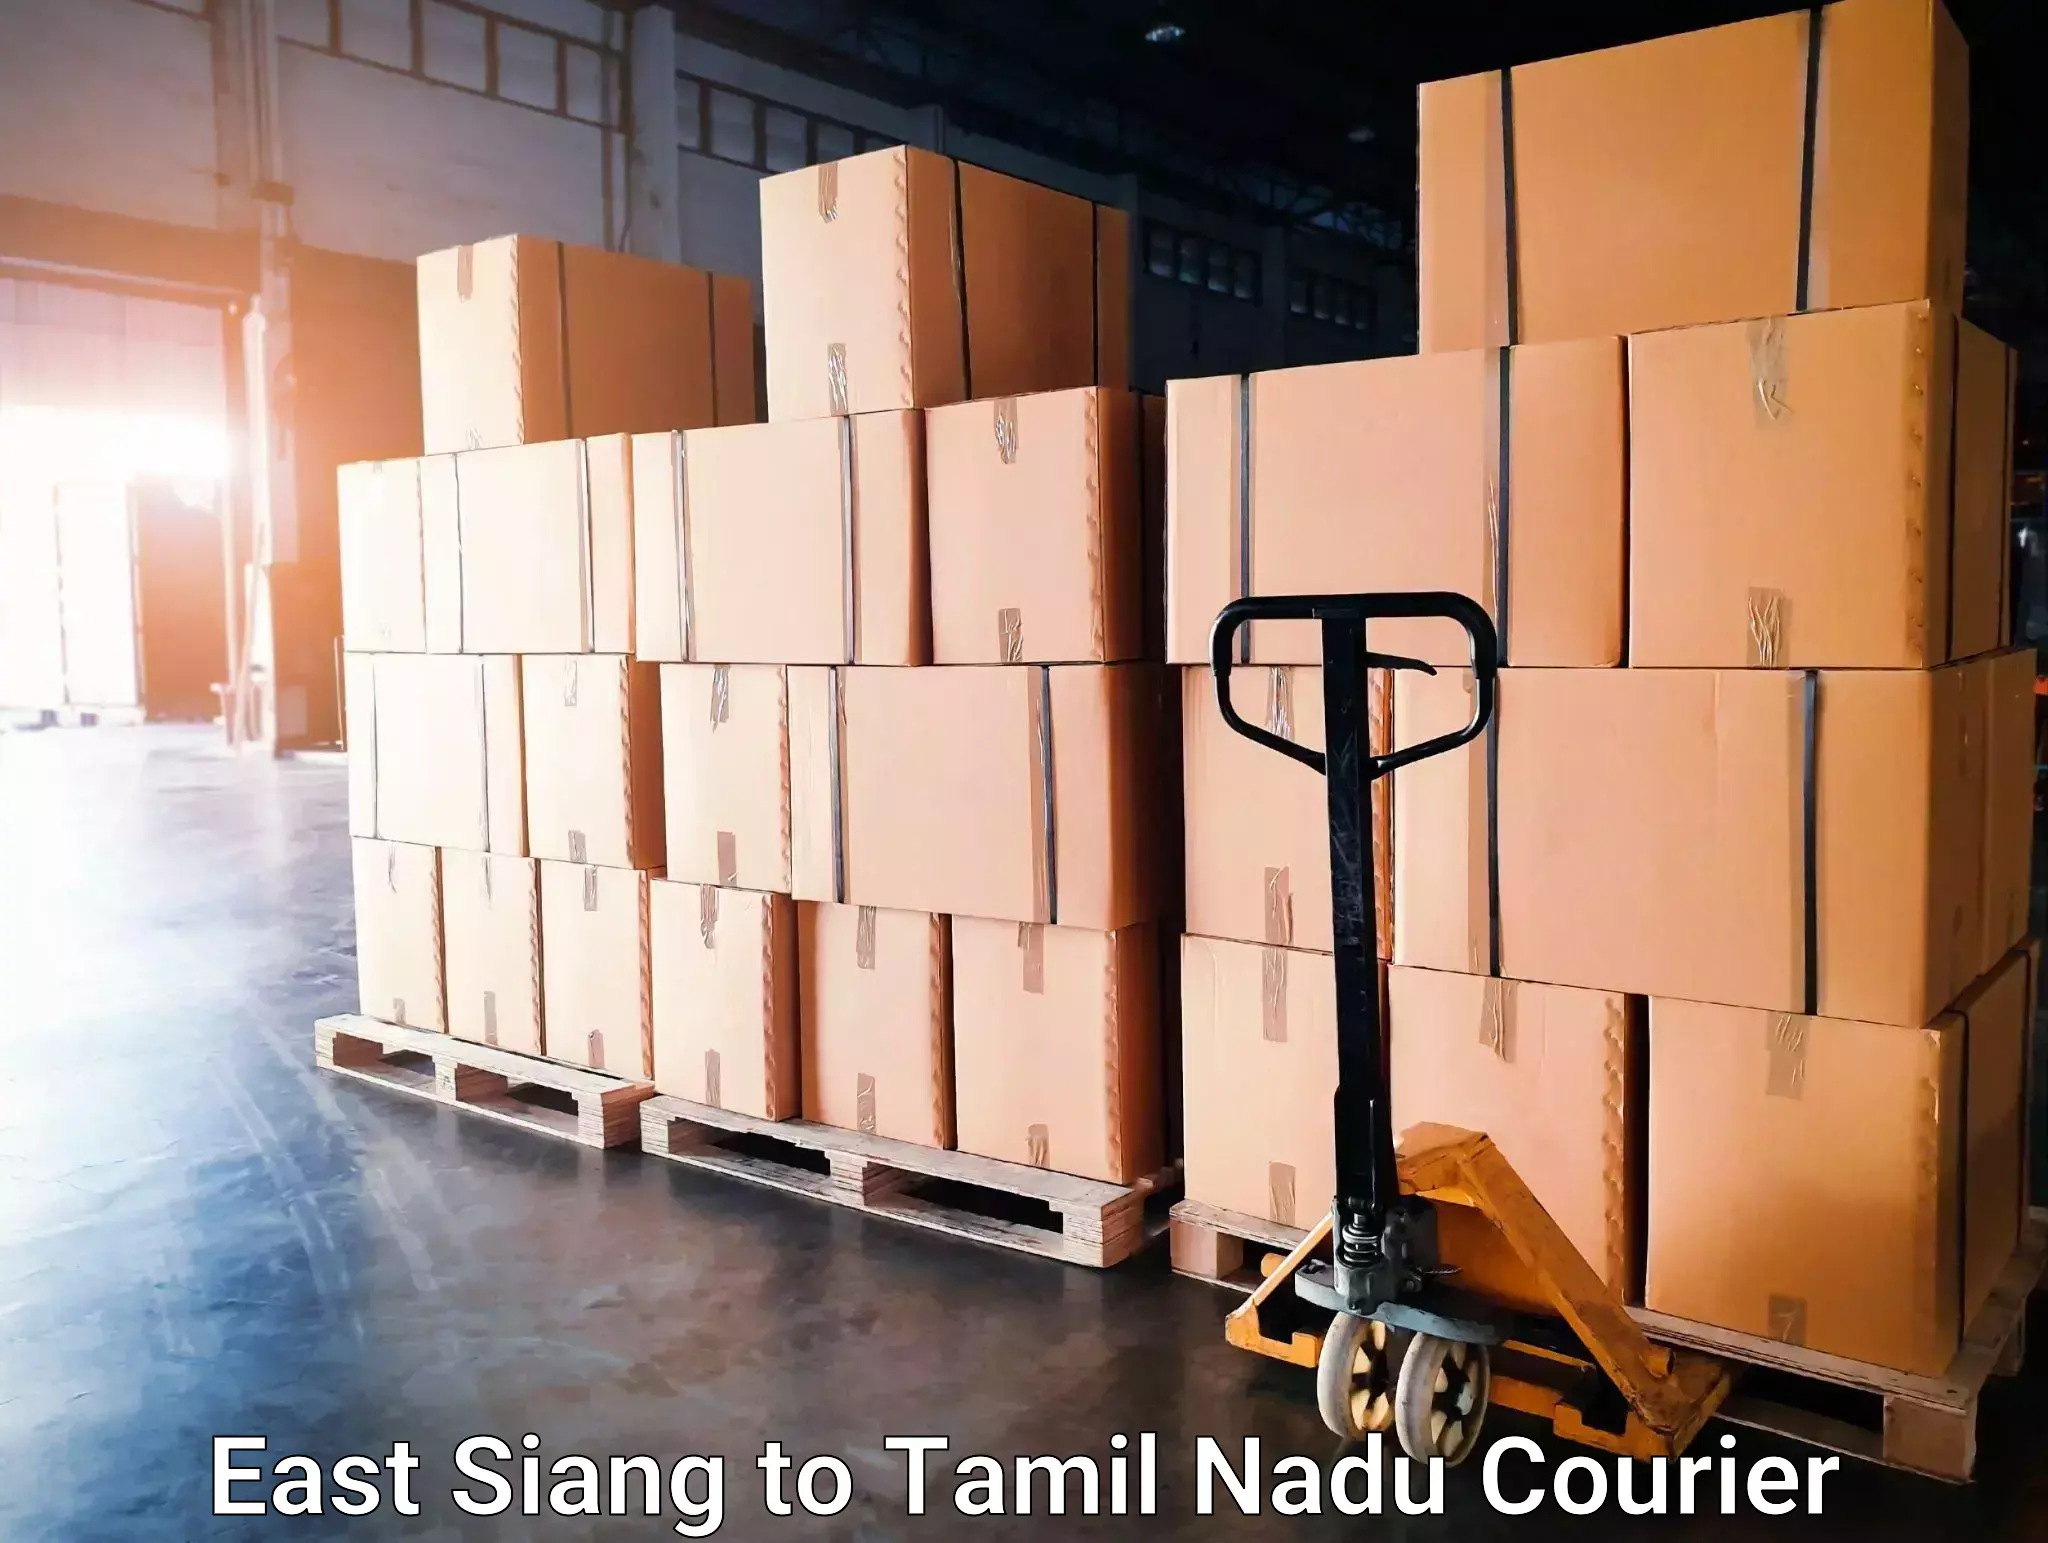 Local courier options East Siang to Tamil Nadu